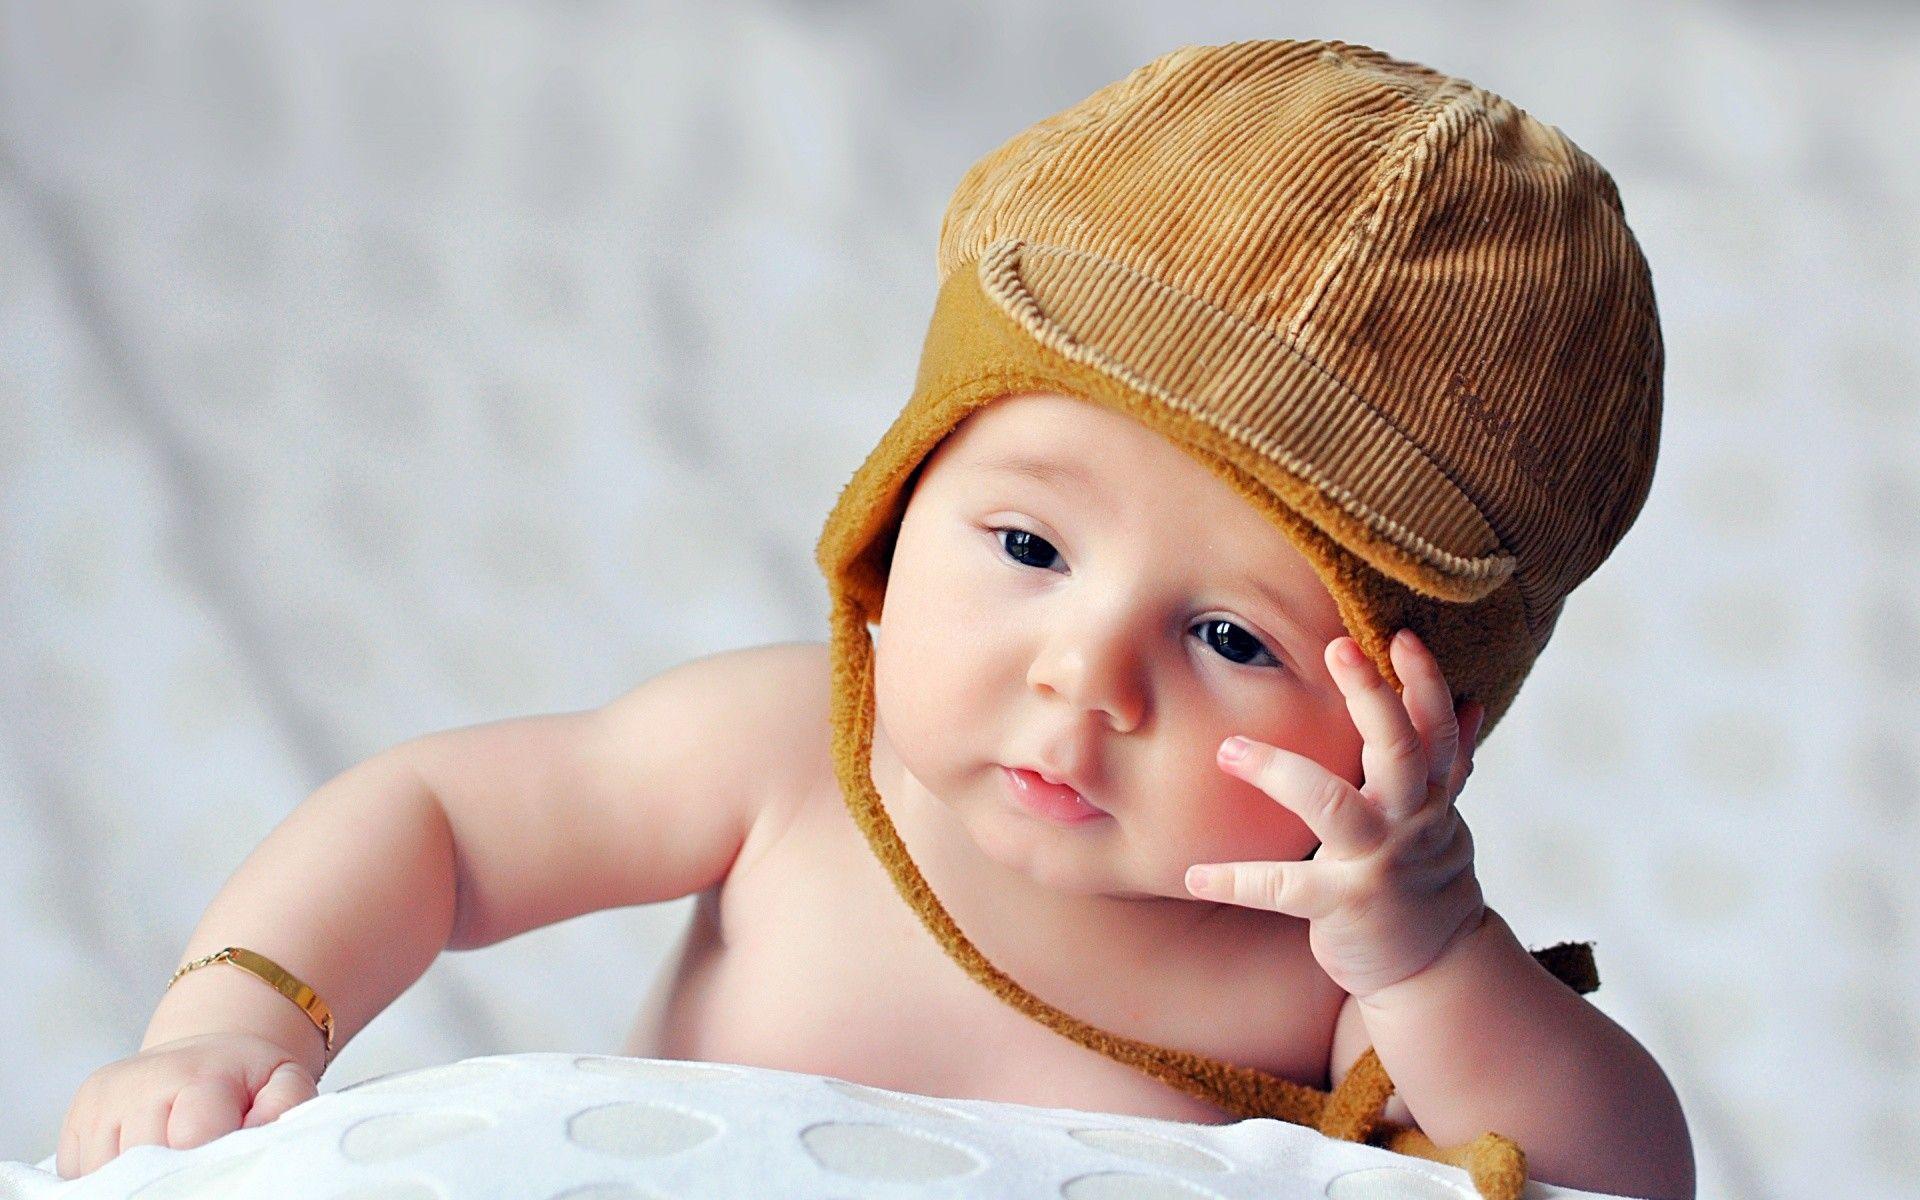 Cute Boy Stock Photos, Images and Backgrounds for Free Download